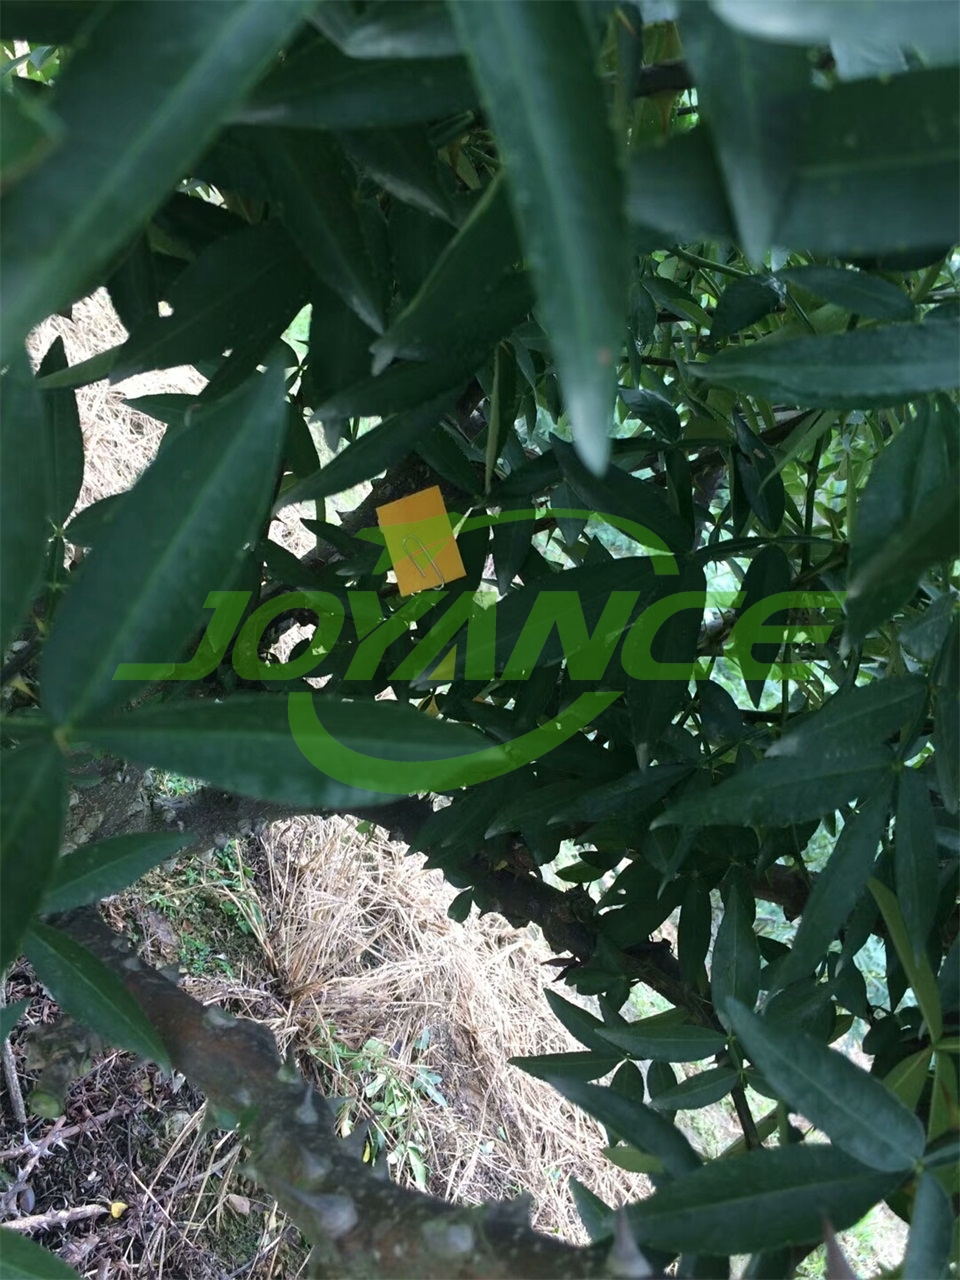 orchard fumigator drone spraying effect-drone agriculture sprayer, agriculture drone sprayer, sprayer drone, UAV crop duster